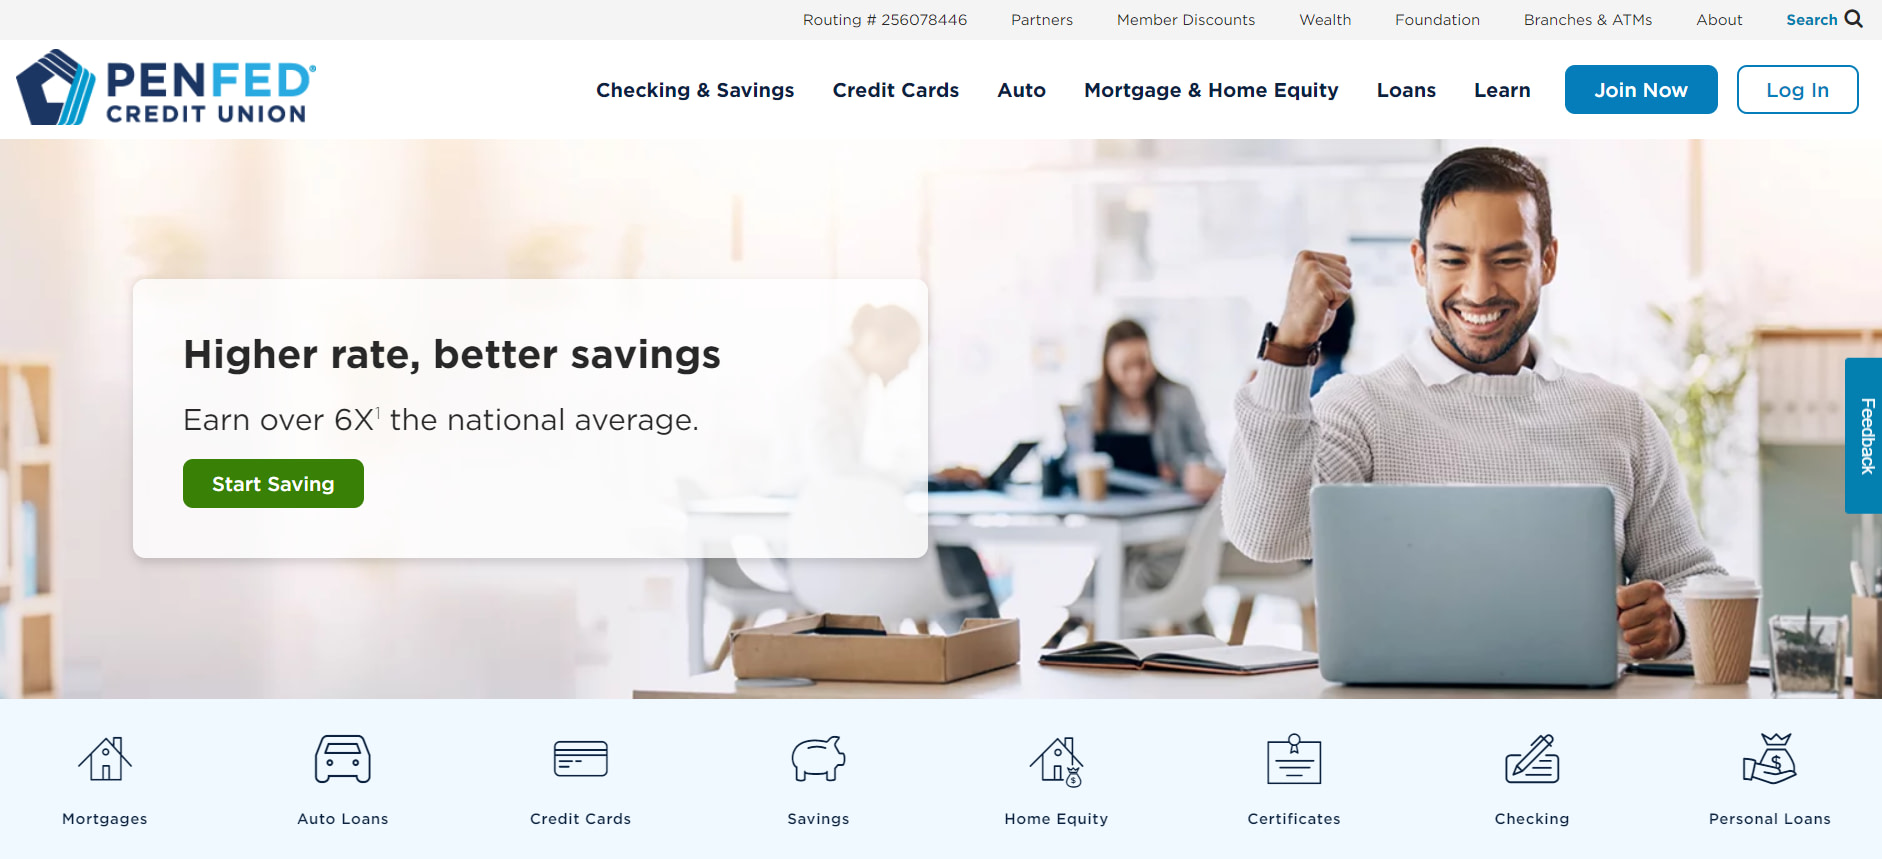 PenFed Credit Union Homepage